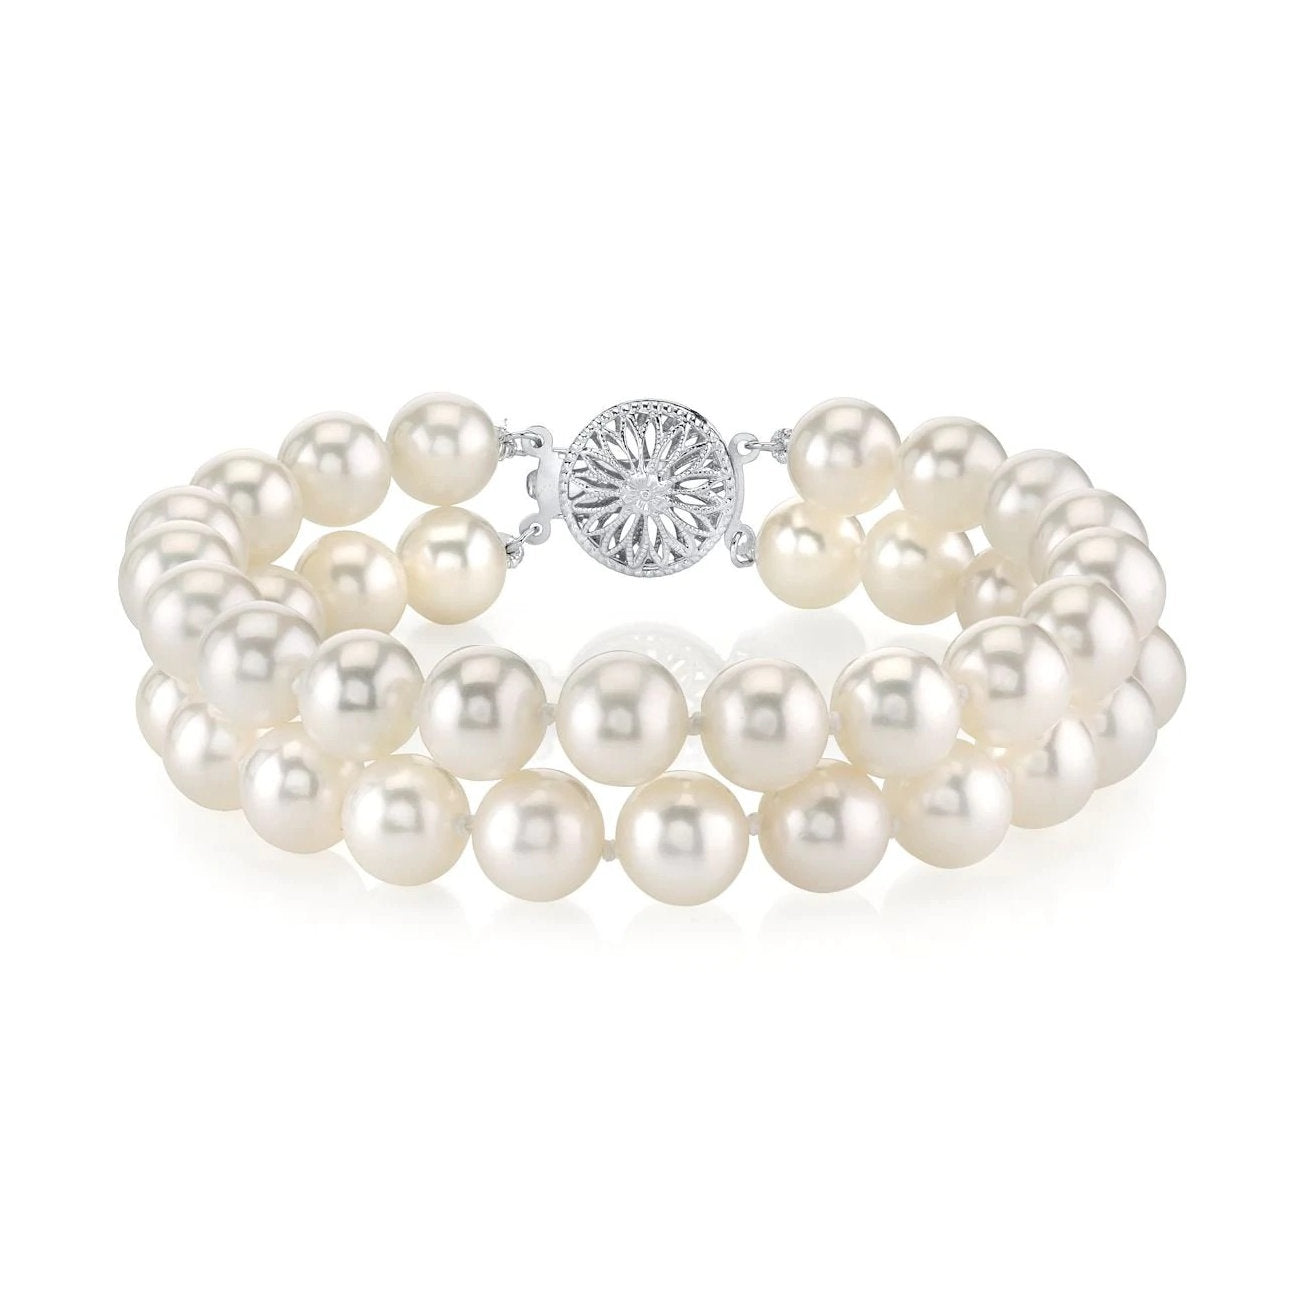 Freshwater Double Pearl Bracelet from Pure Pearls